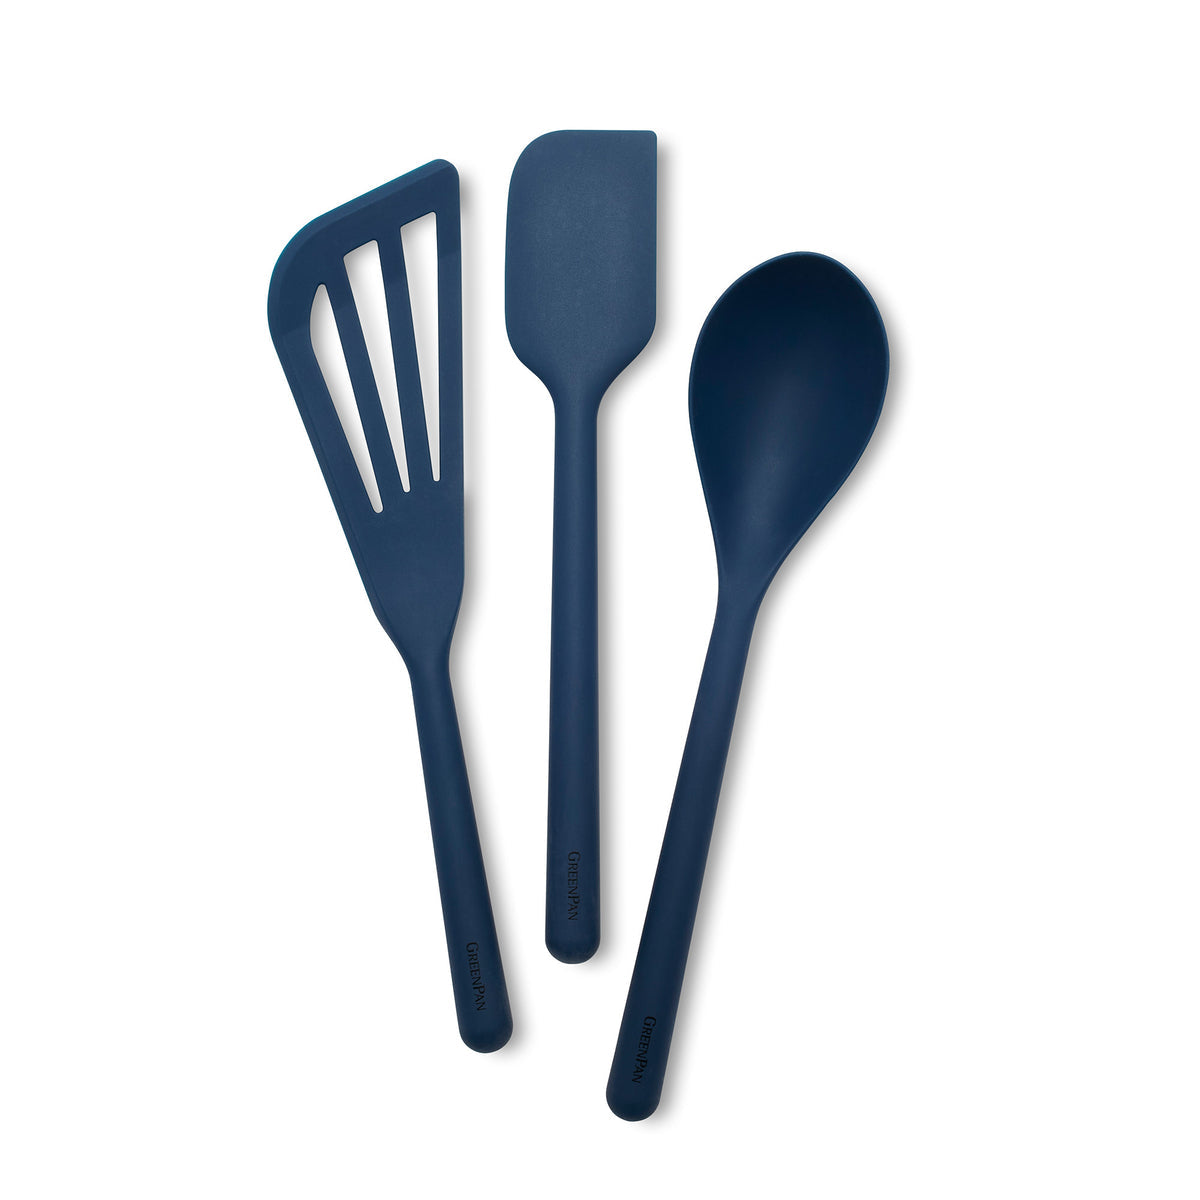 Healthy Non-Toxic PFAS Free Cookware - Platinum Silicone Tools 7-Piece Utensil Set | Navy by GreenPan